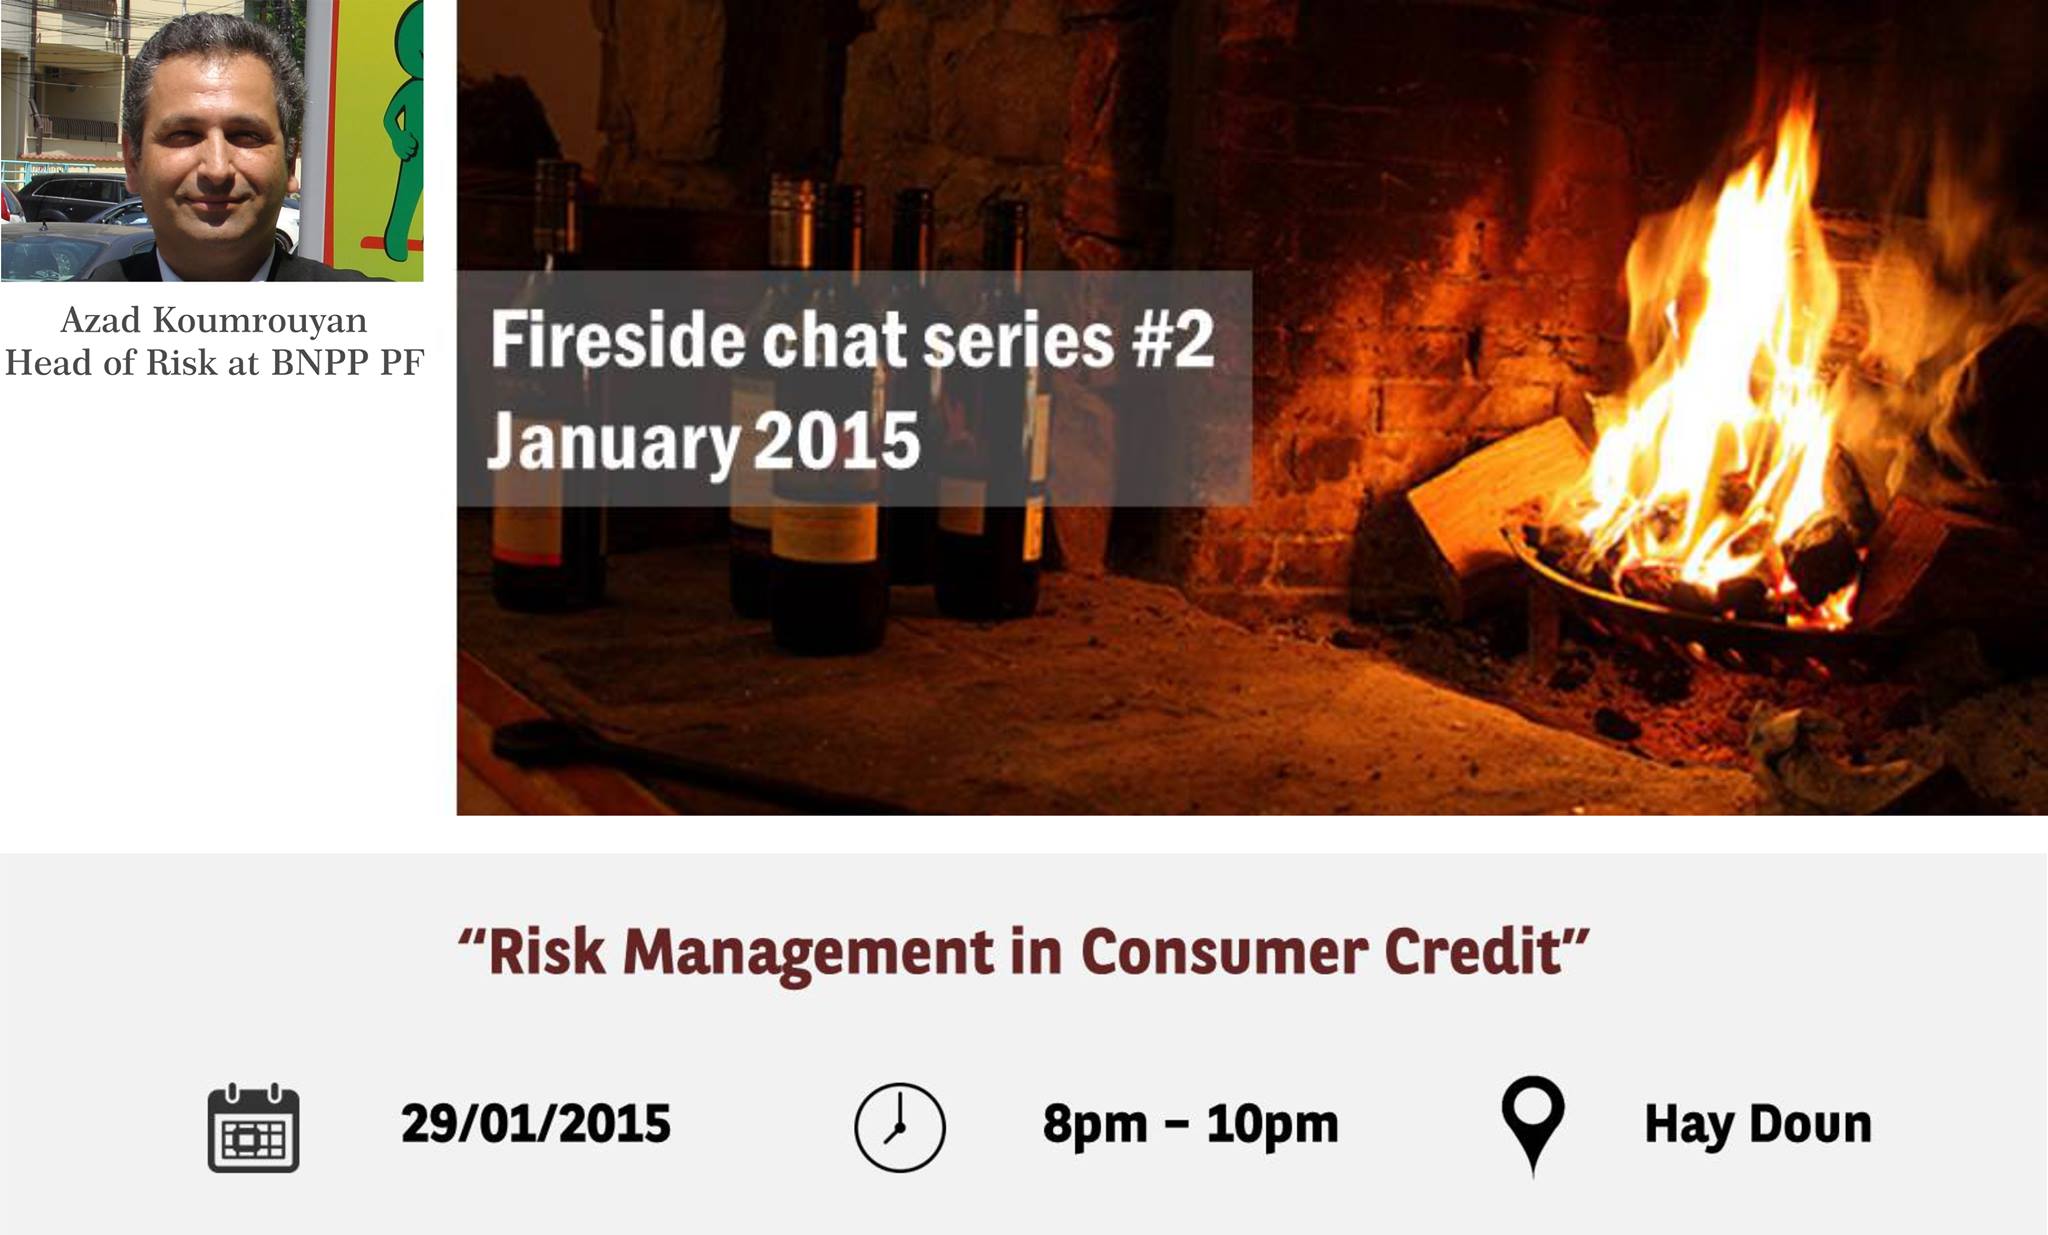 Fireside chat series #2 with AGBU Young Professionals Belgium